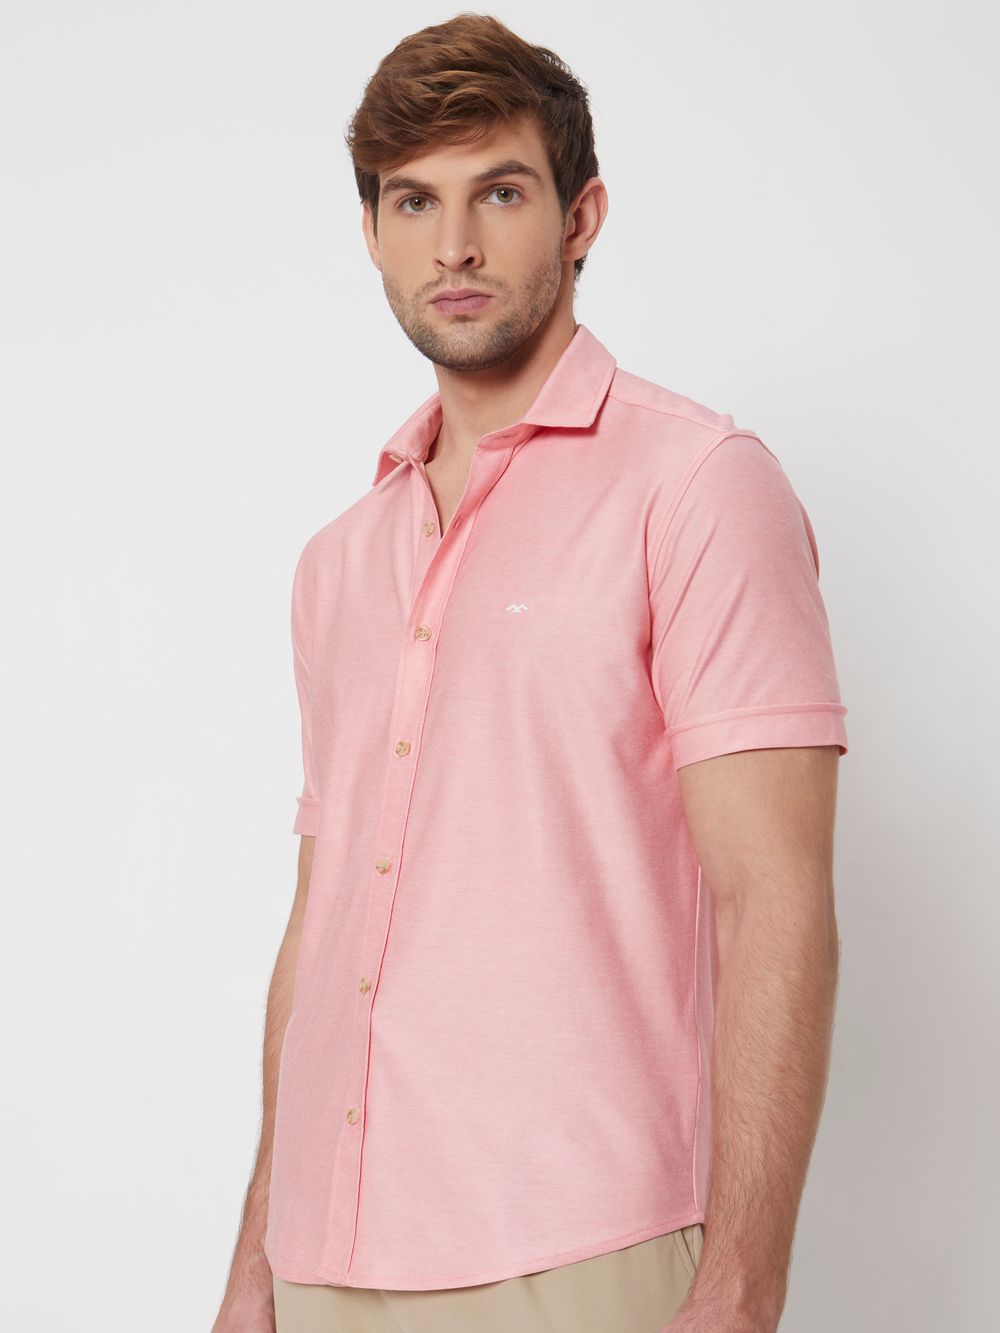 Pink Knitted Plainslim Fit Casual Shirt